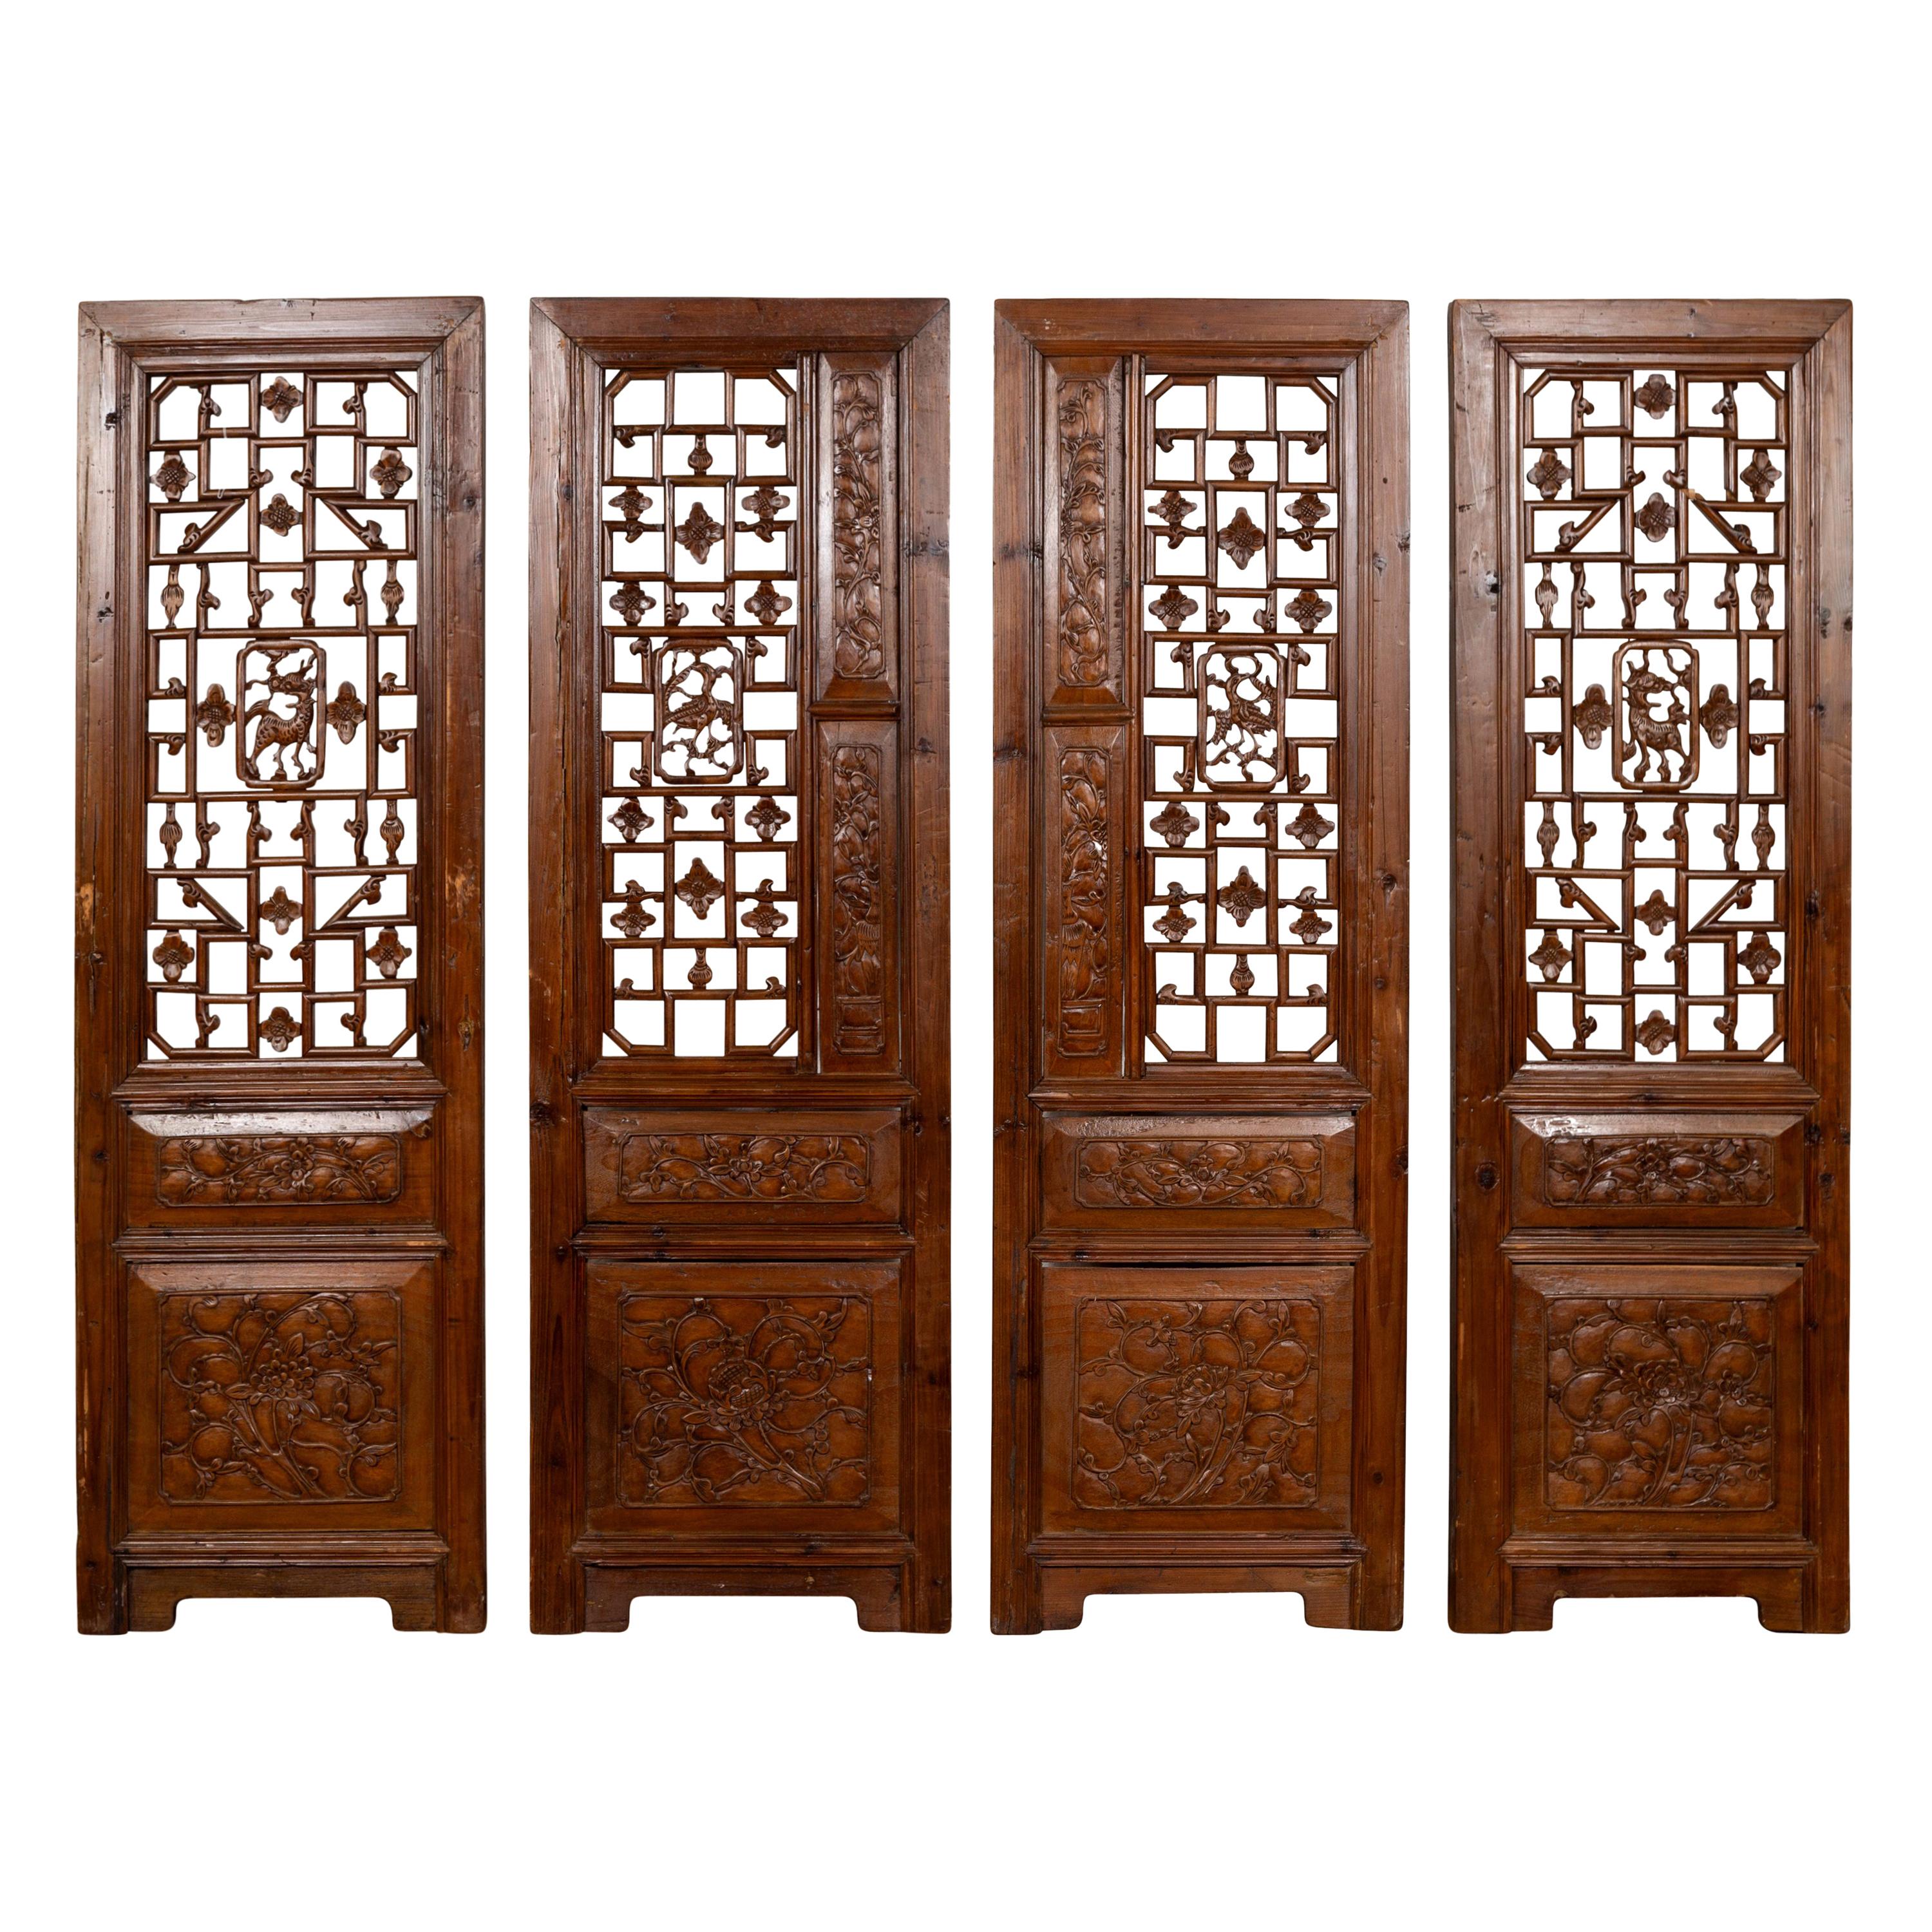 Set of Four Carved Elm Screen Panels with Fretwork, Foliage and Floral Motifs